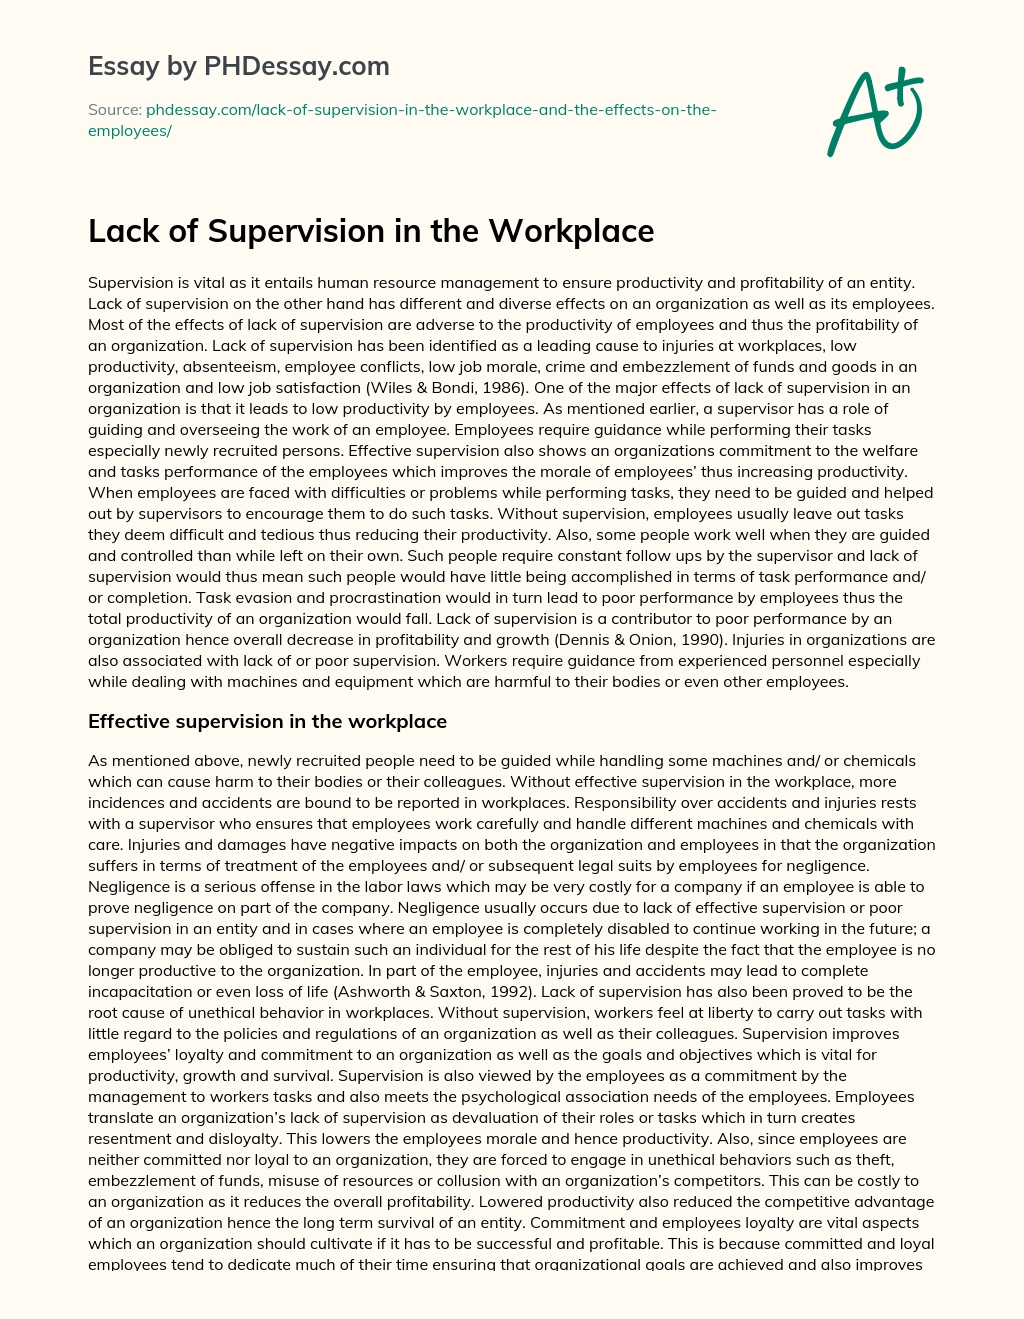 Lack of Supervision in the Workplace essay